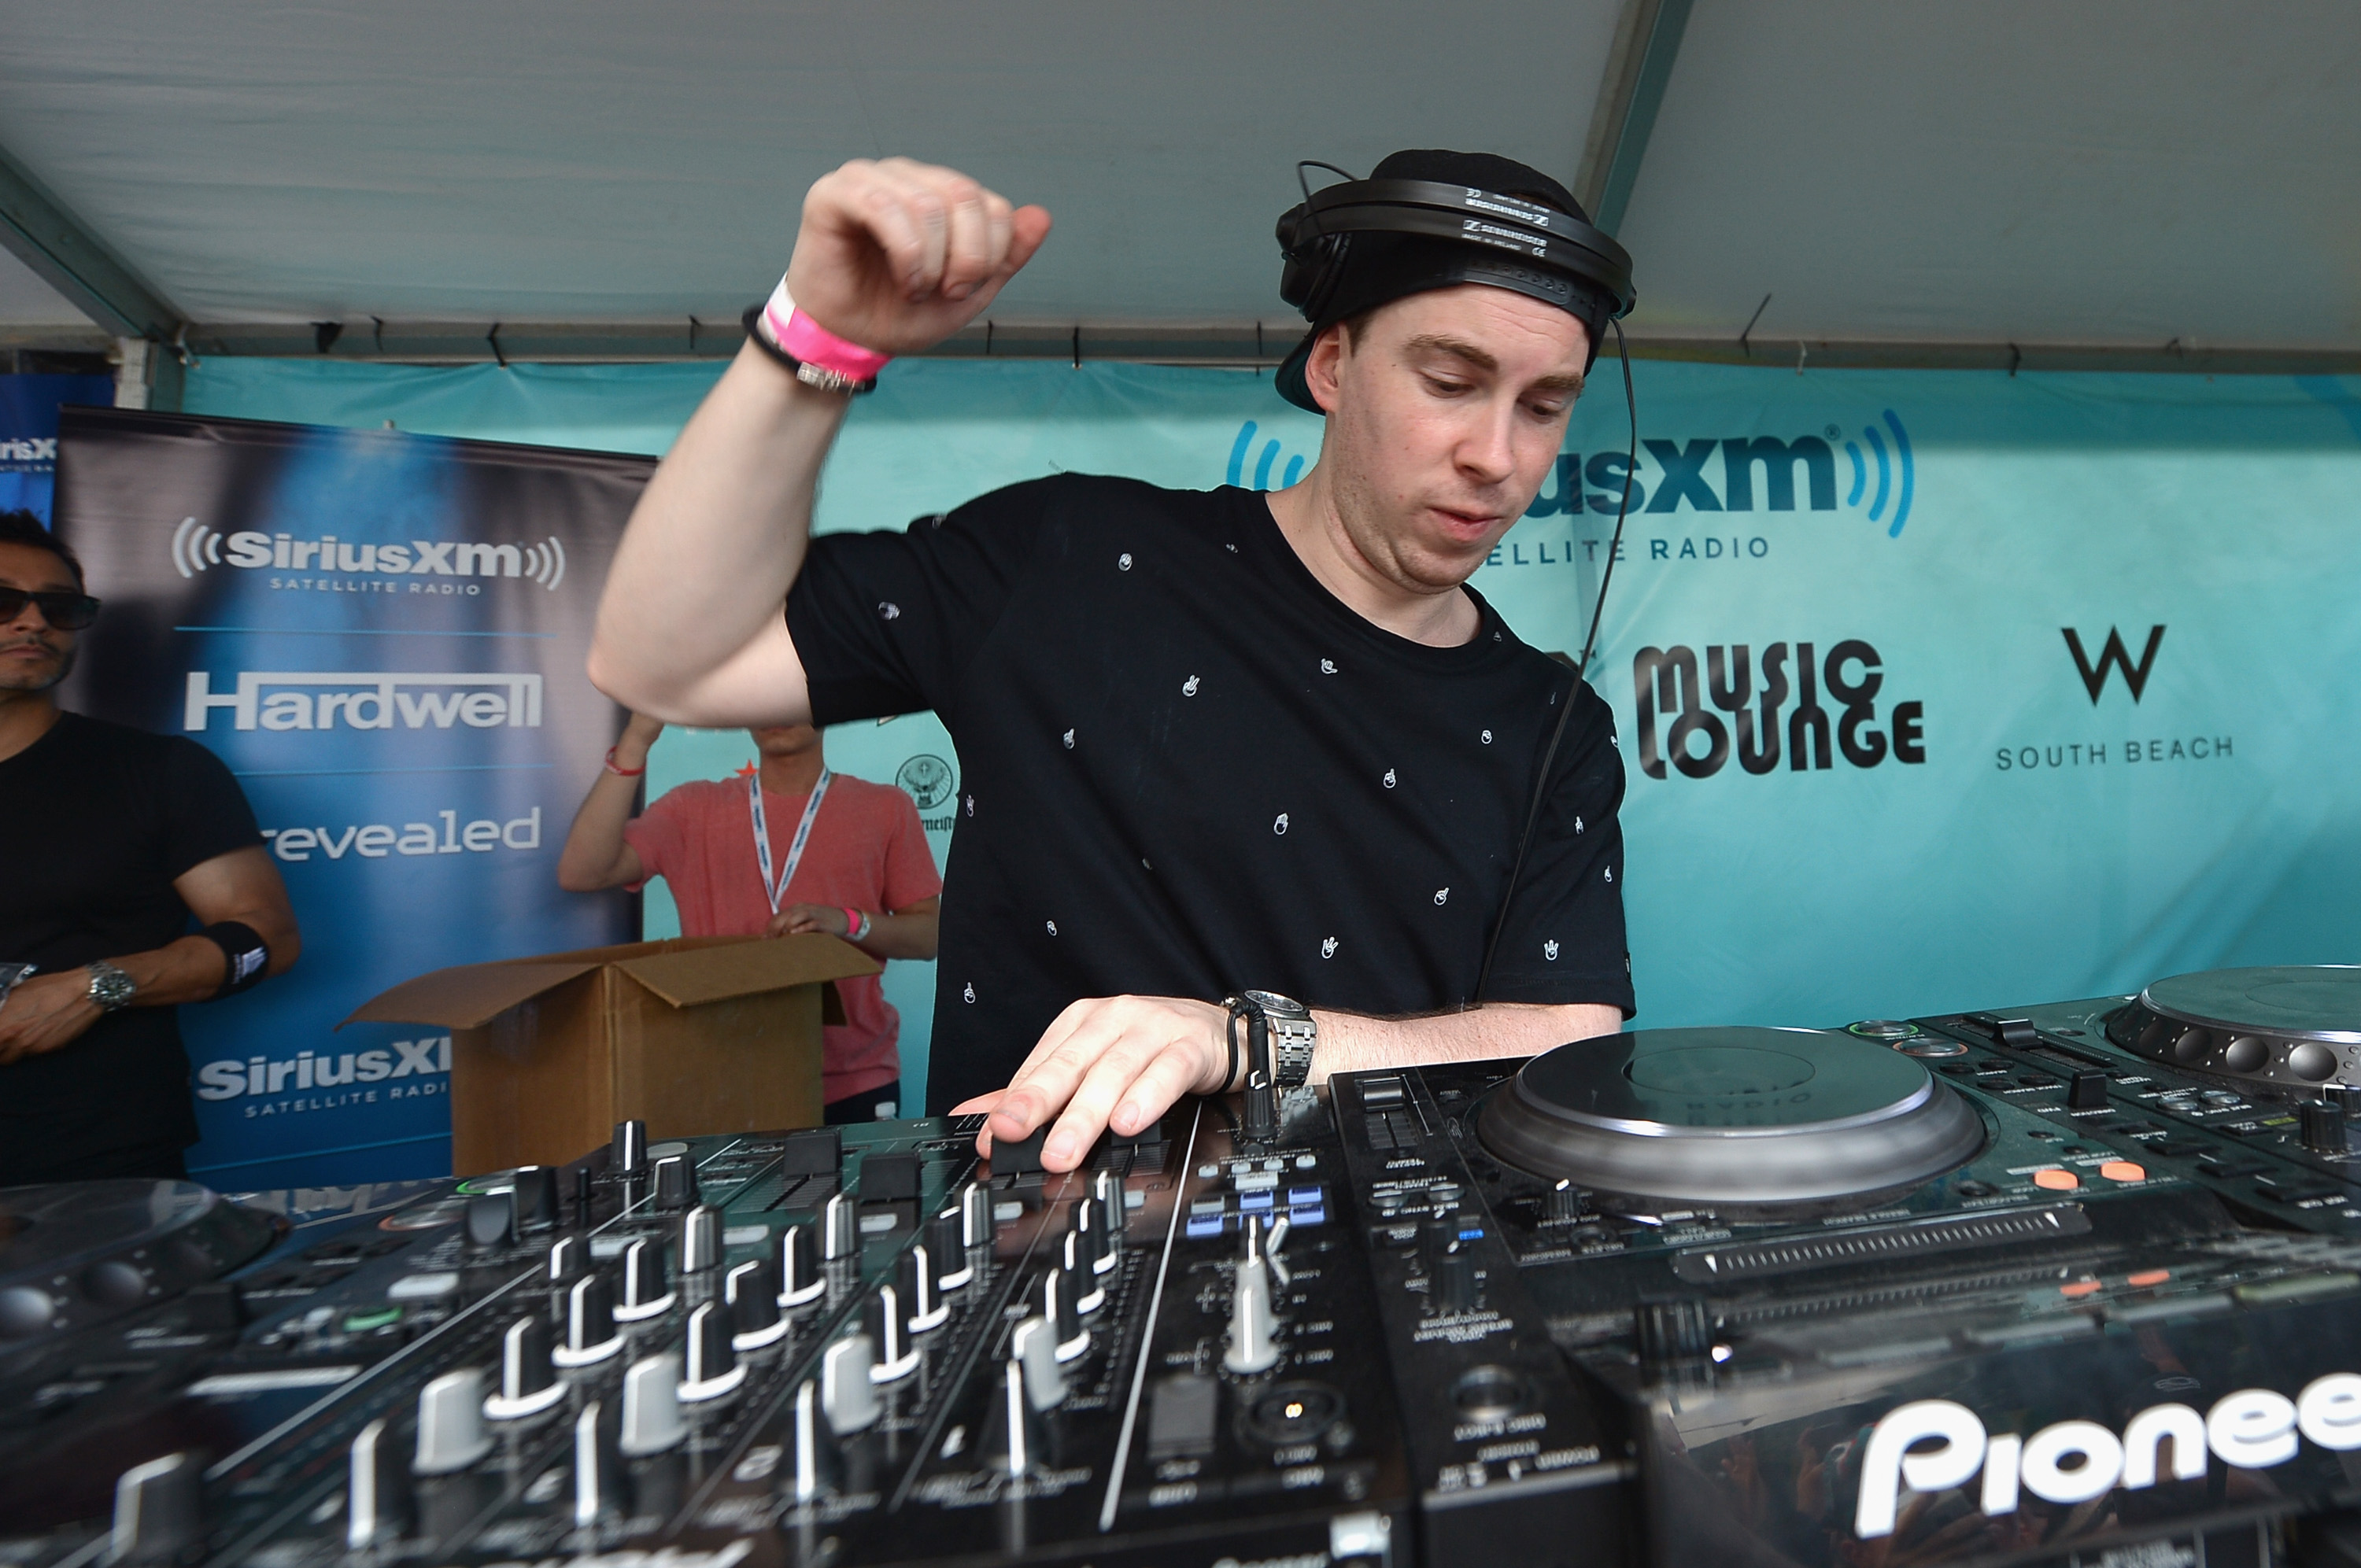 Hardwell performs at SiriusXM"s "UMF Radio" Broadcast Live From The SiriusXM Music Lounge at W Hotel